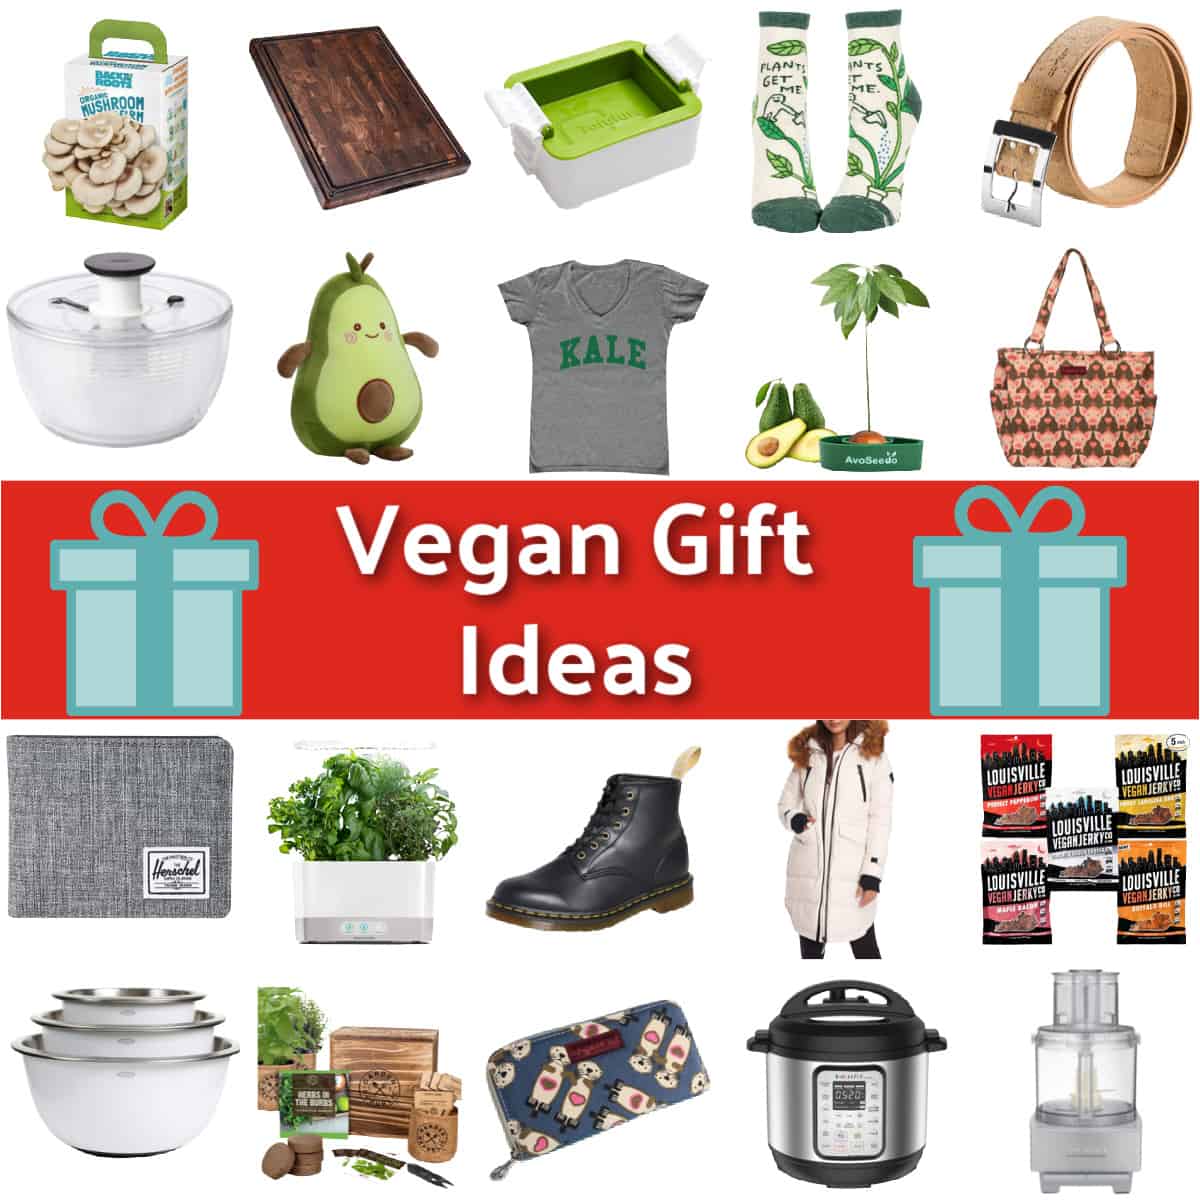 Photos collage of vegan gift ideas for the holidays. 